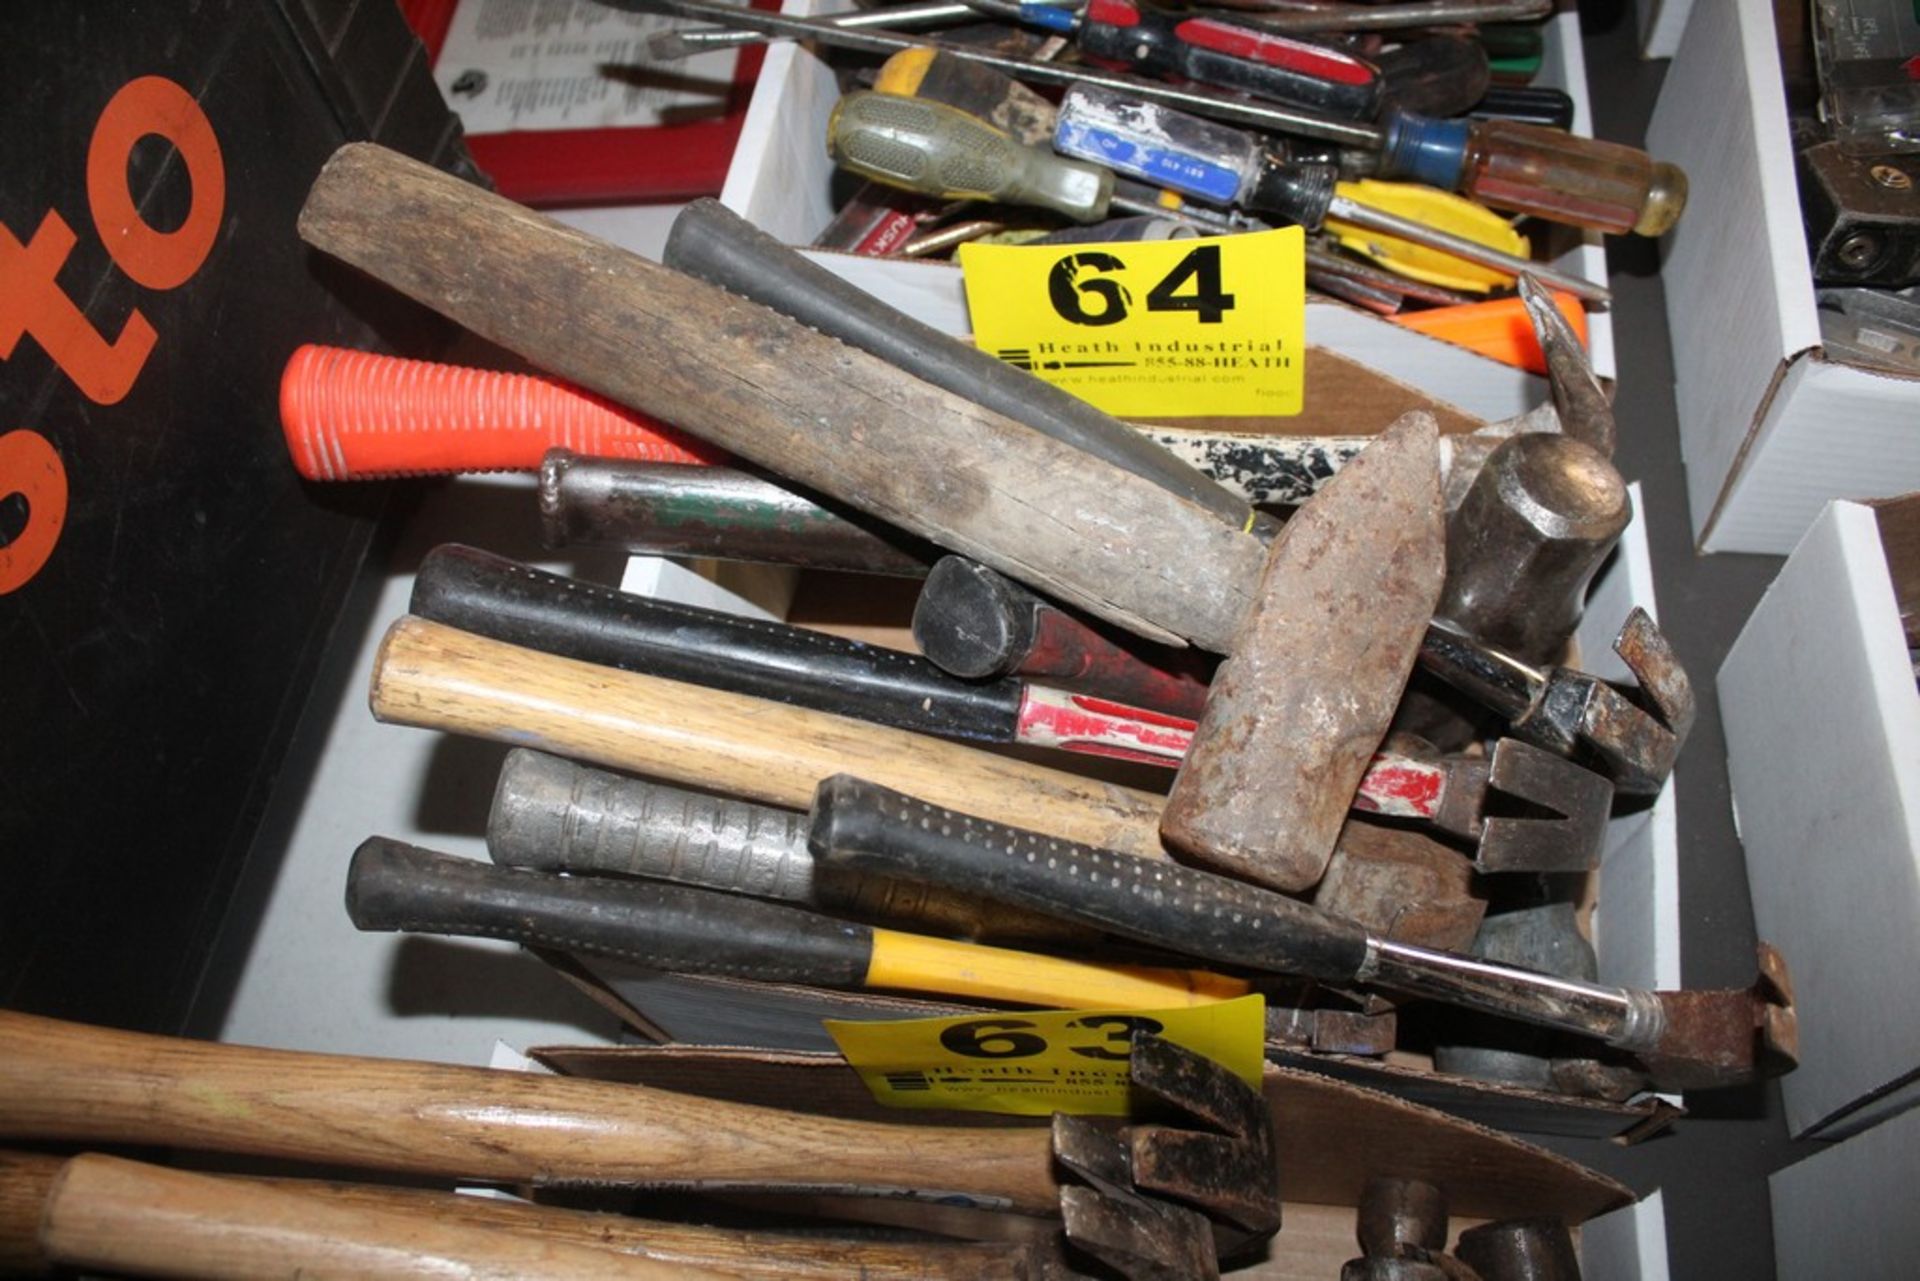 LARGE QUANTITY OF HAMMERS